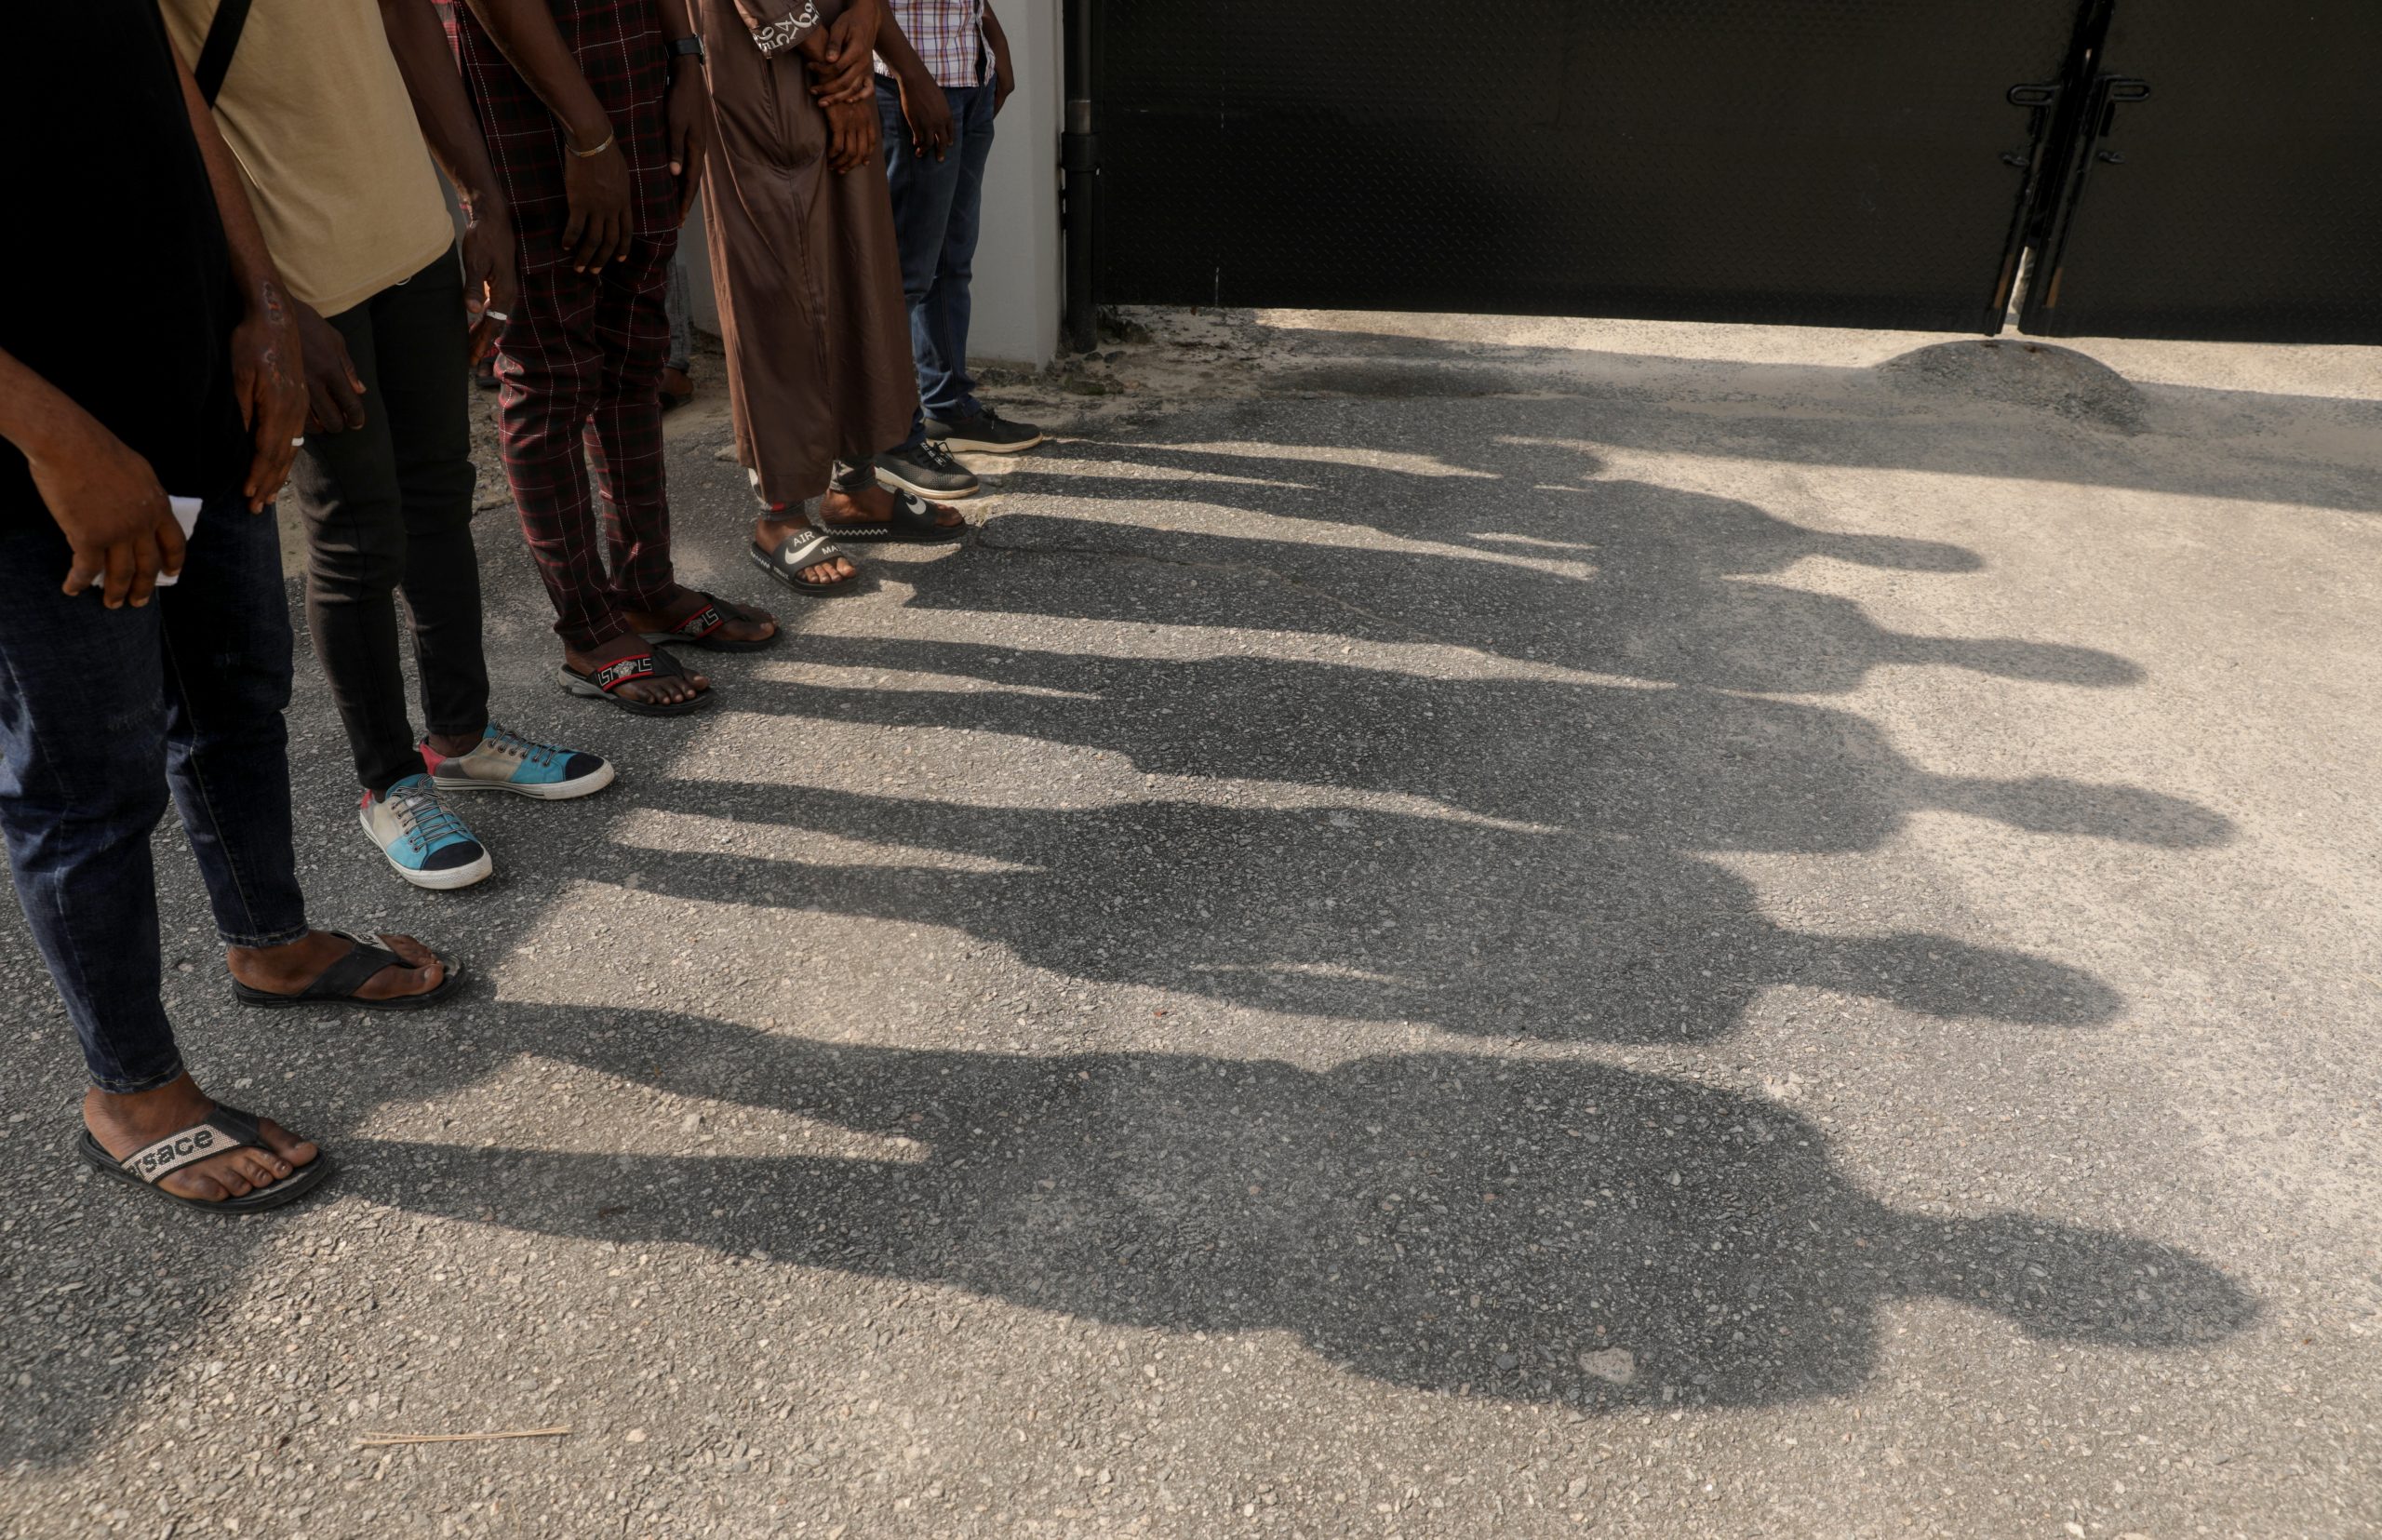 Four men stand side by side and their shadows are seen on the ground